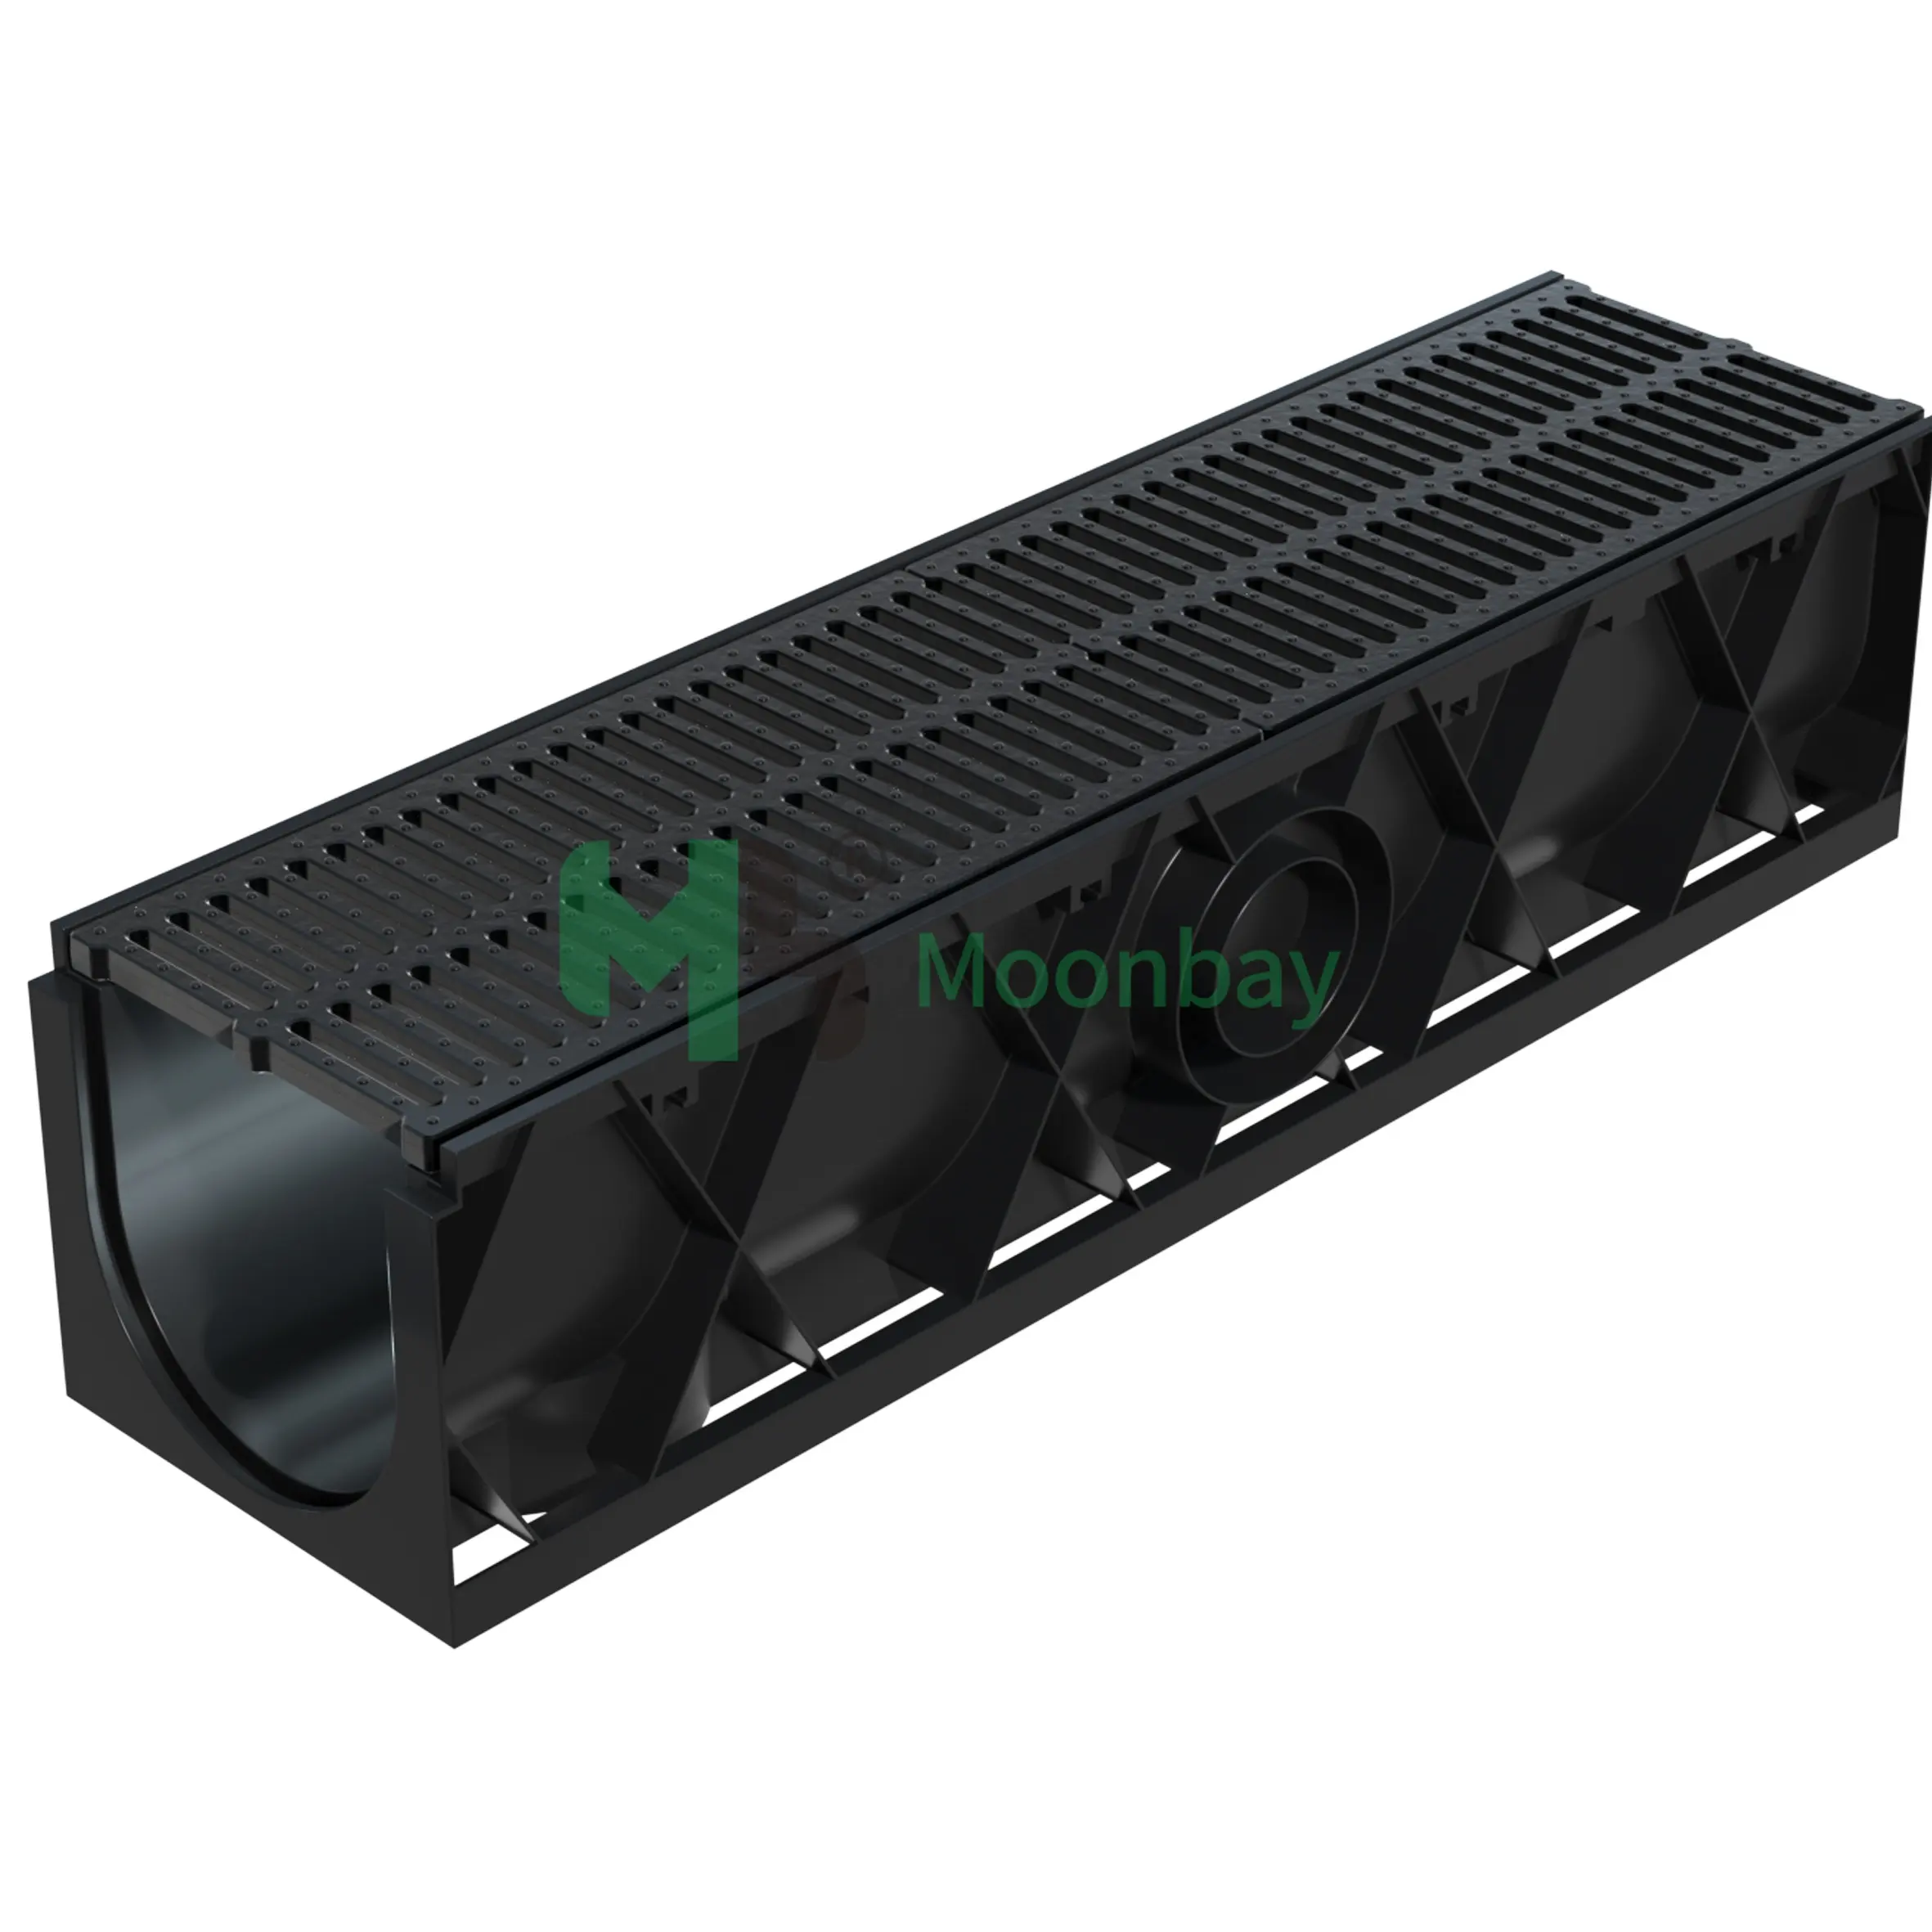 Outdoor Drain Driveway Channel Trench Drain Grate Sewer Trench Cover Drain Channel Grate